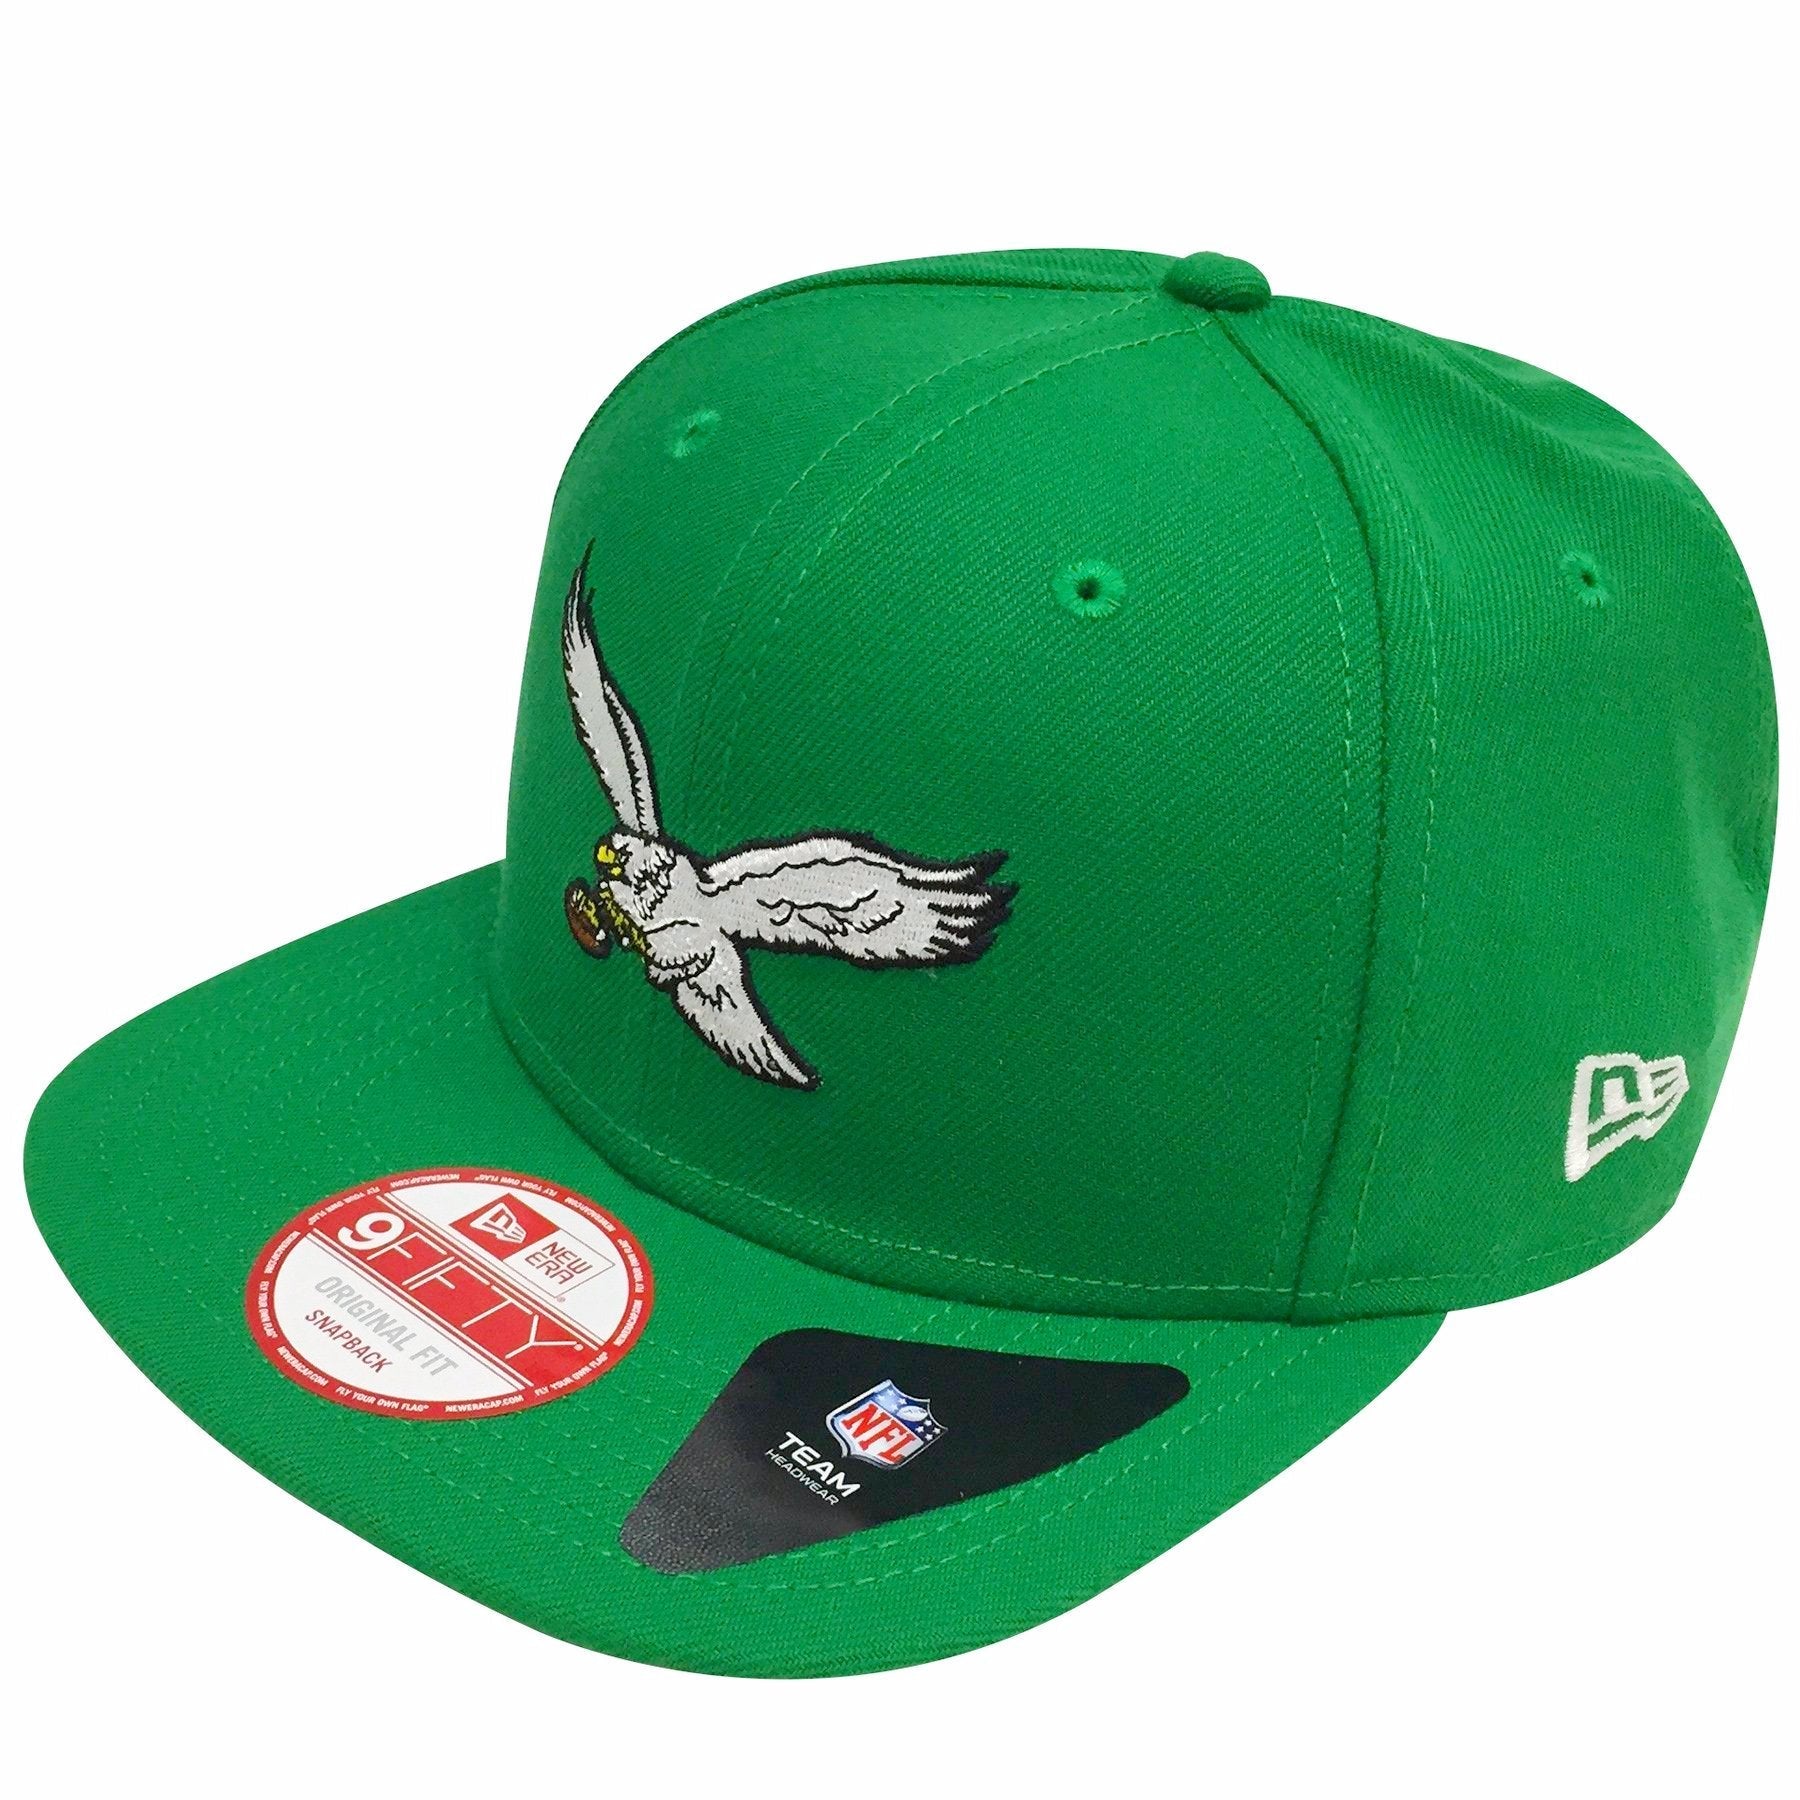 the philadelphia eagles kelly green vintage snapback hat has a kelly green structured crown, a kelly green flat brim, and a new era logo embroidered in solid white